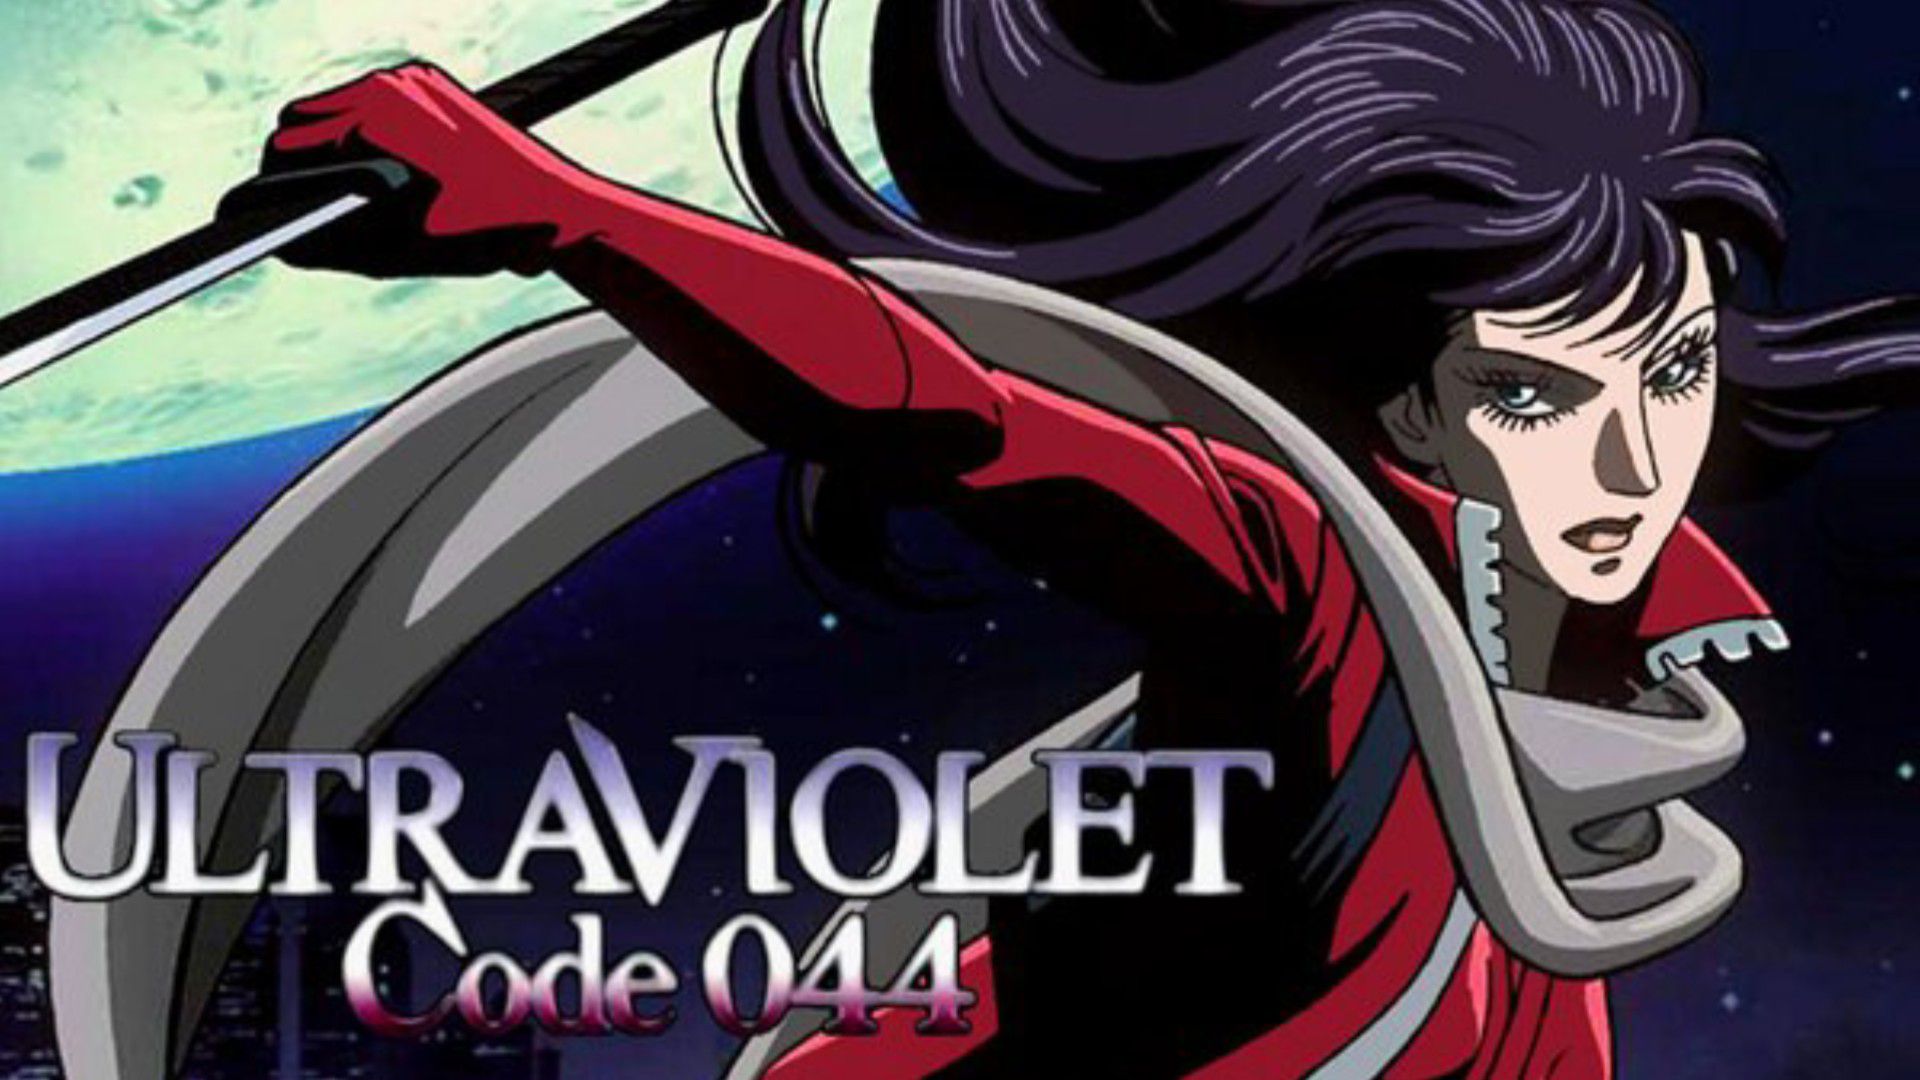 Sony Hints at Ultraviolet: Code 044's U.S. Release Soon - News - Anime News  Network